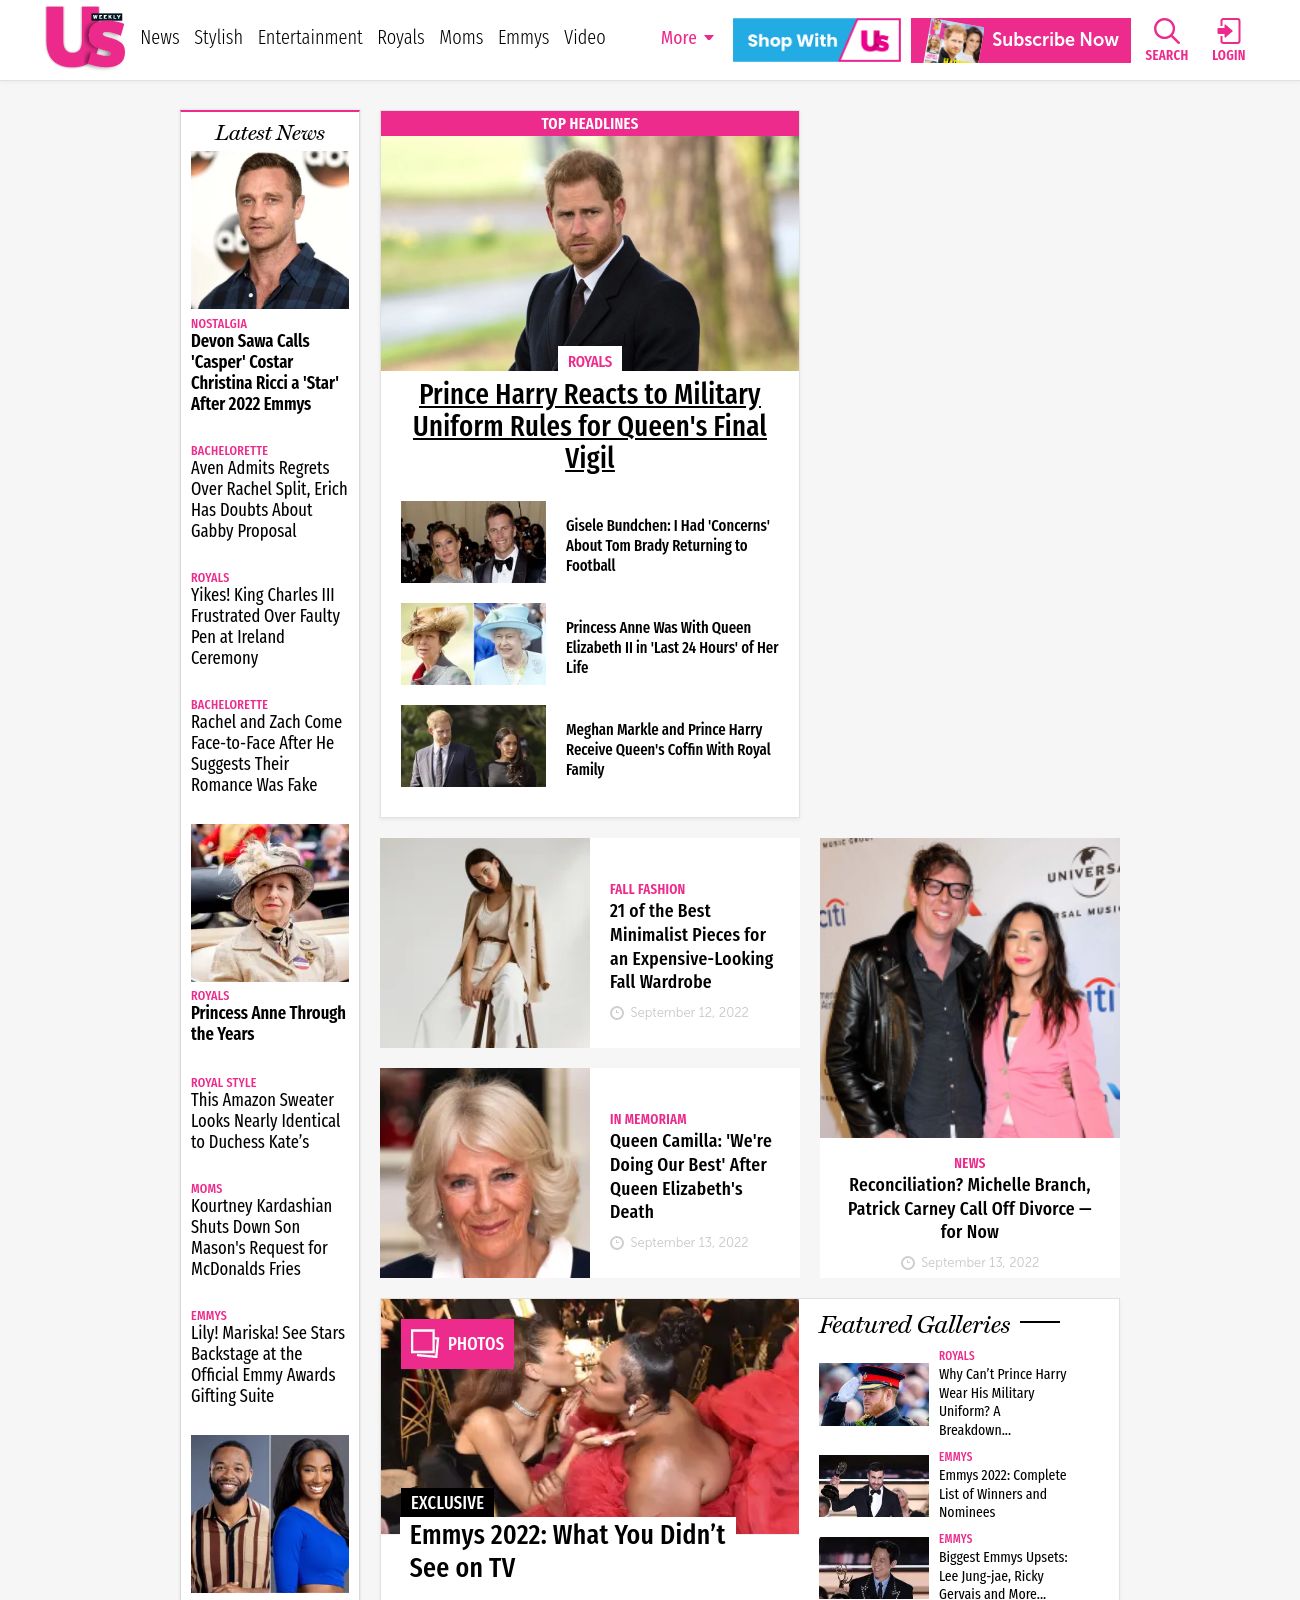 Us Weekly at 2022-09-14 01:40:04-04:00 local time